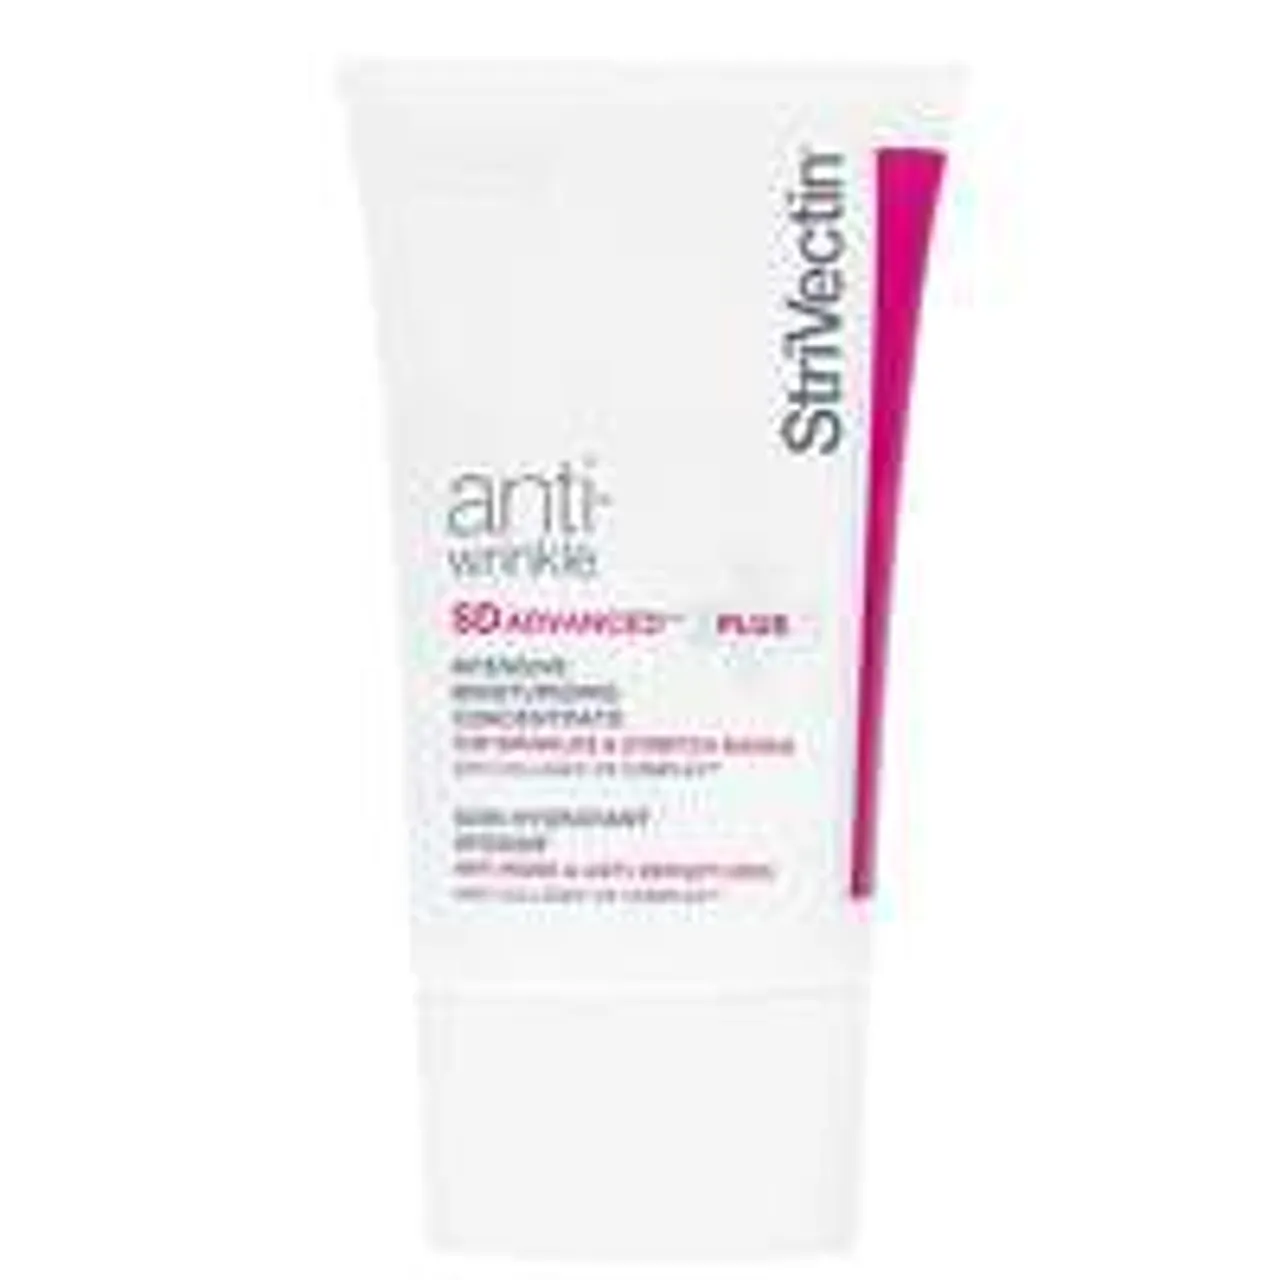 StriVectin Anti-Wrinkle SD Advanced Plus Intensive Moisturizing Concentrate for Wrinkles and Stretch Marks 60ml